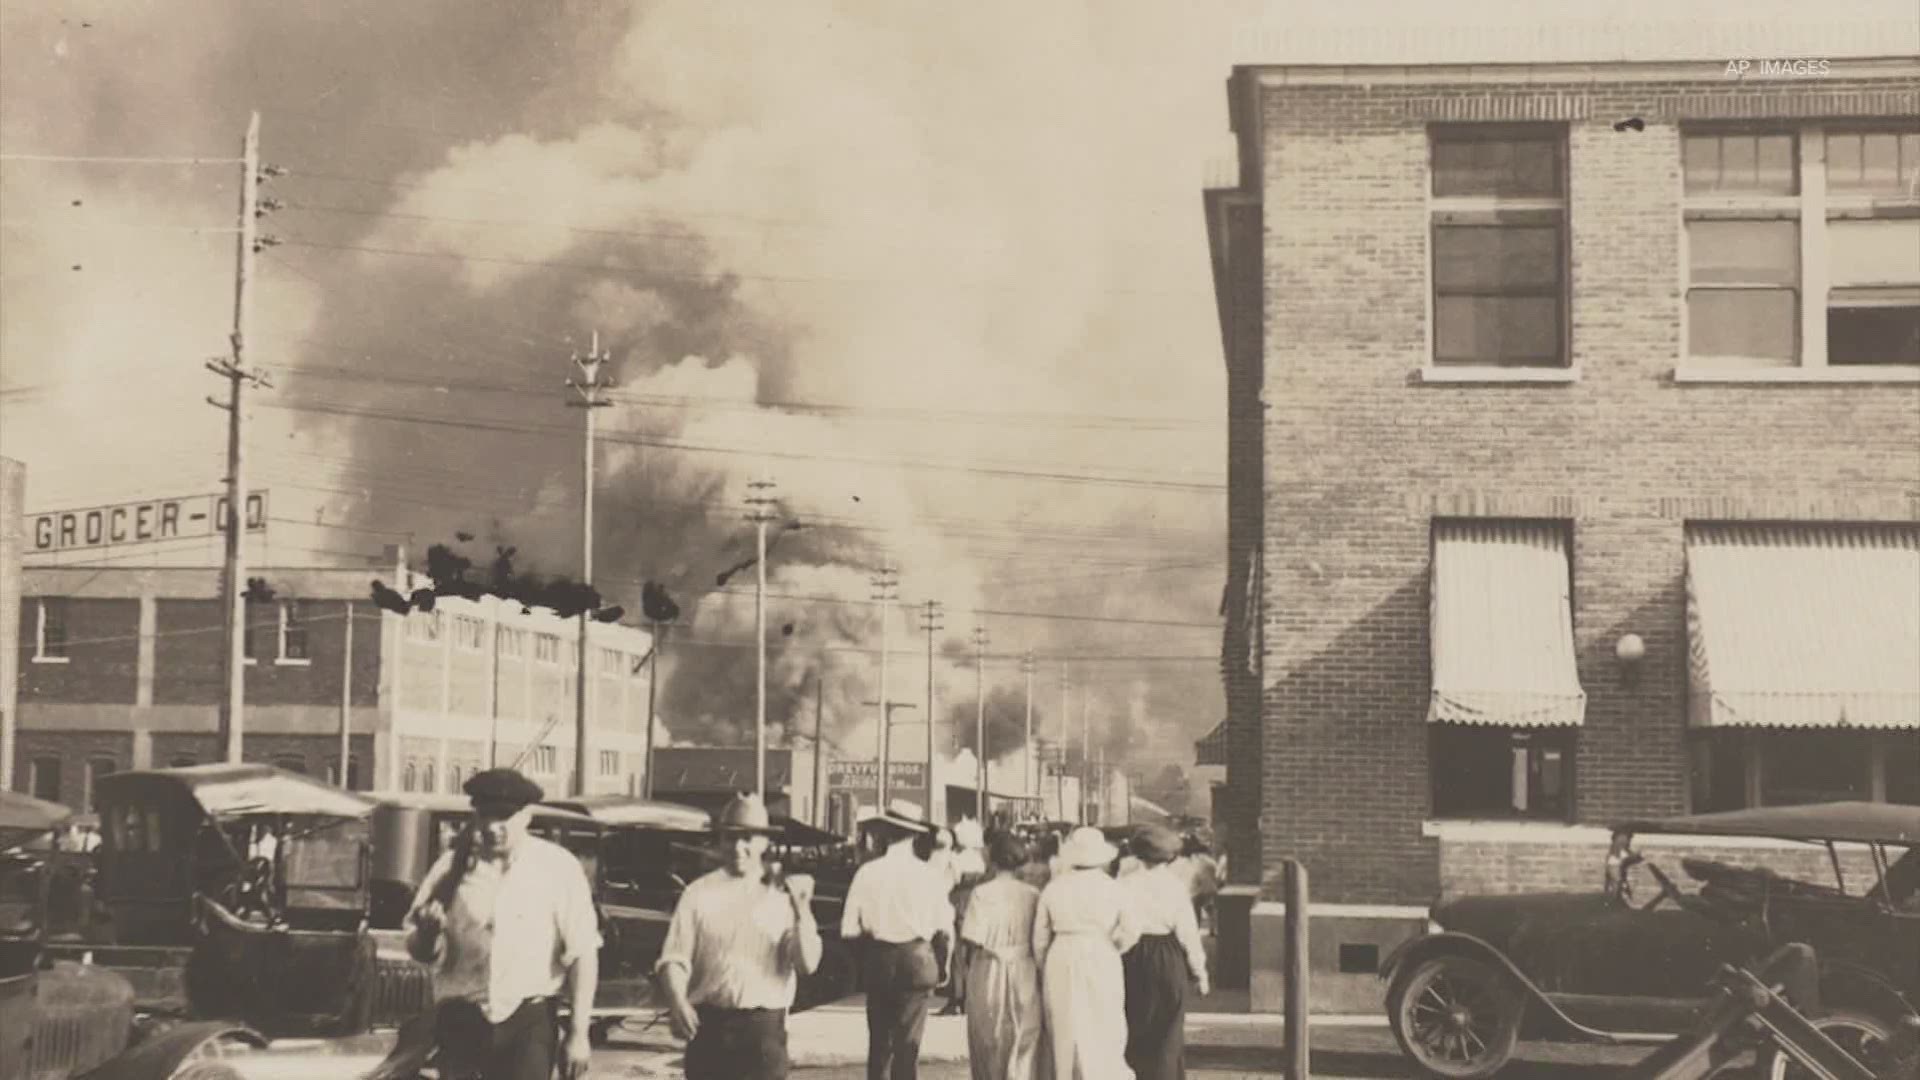 The Greenwood District was once an economic powerhouse but on May 31, 1921, a White mob attacked the all-Black community, killing hundreds.